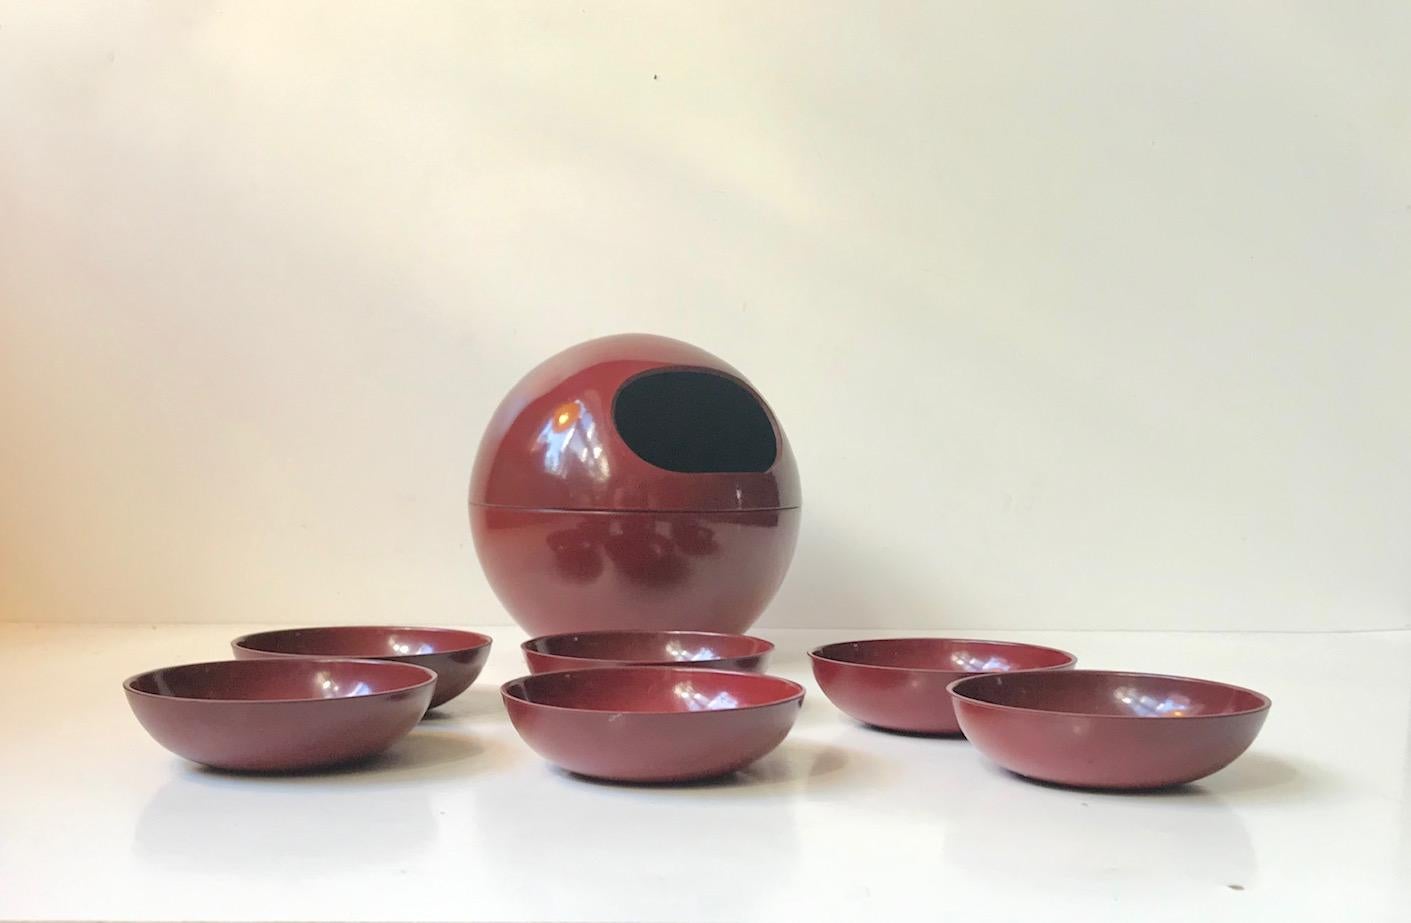 Barware, snack or peanut dispenser and 6 matching bowl. Spherical shape and composed of lacquered resin. Manufactured in Japan during the late 1960s or early 1970s. The 6 bowl is meant to be stored within the dispenser.